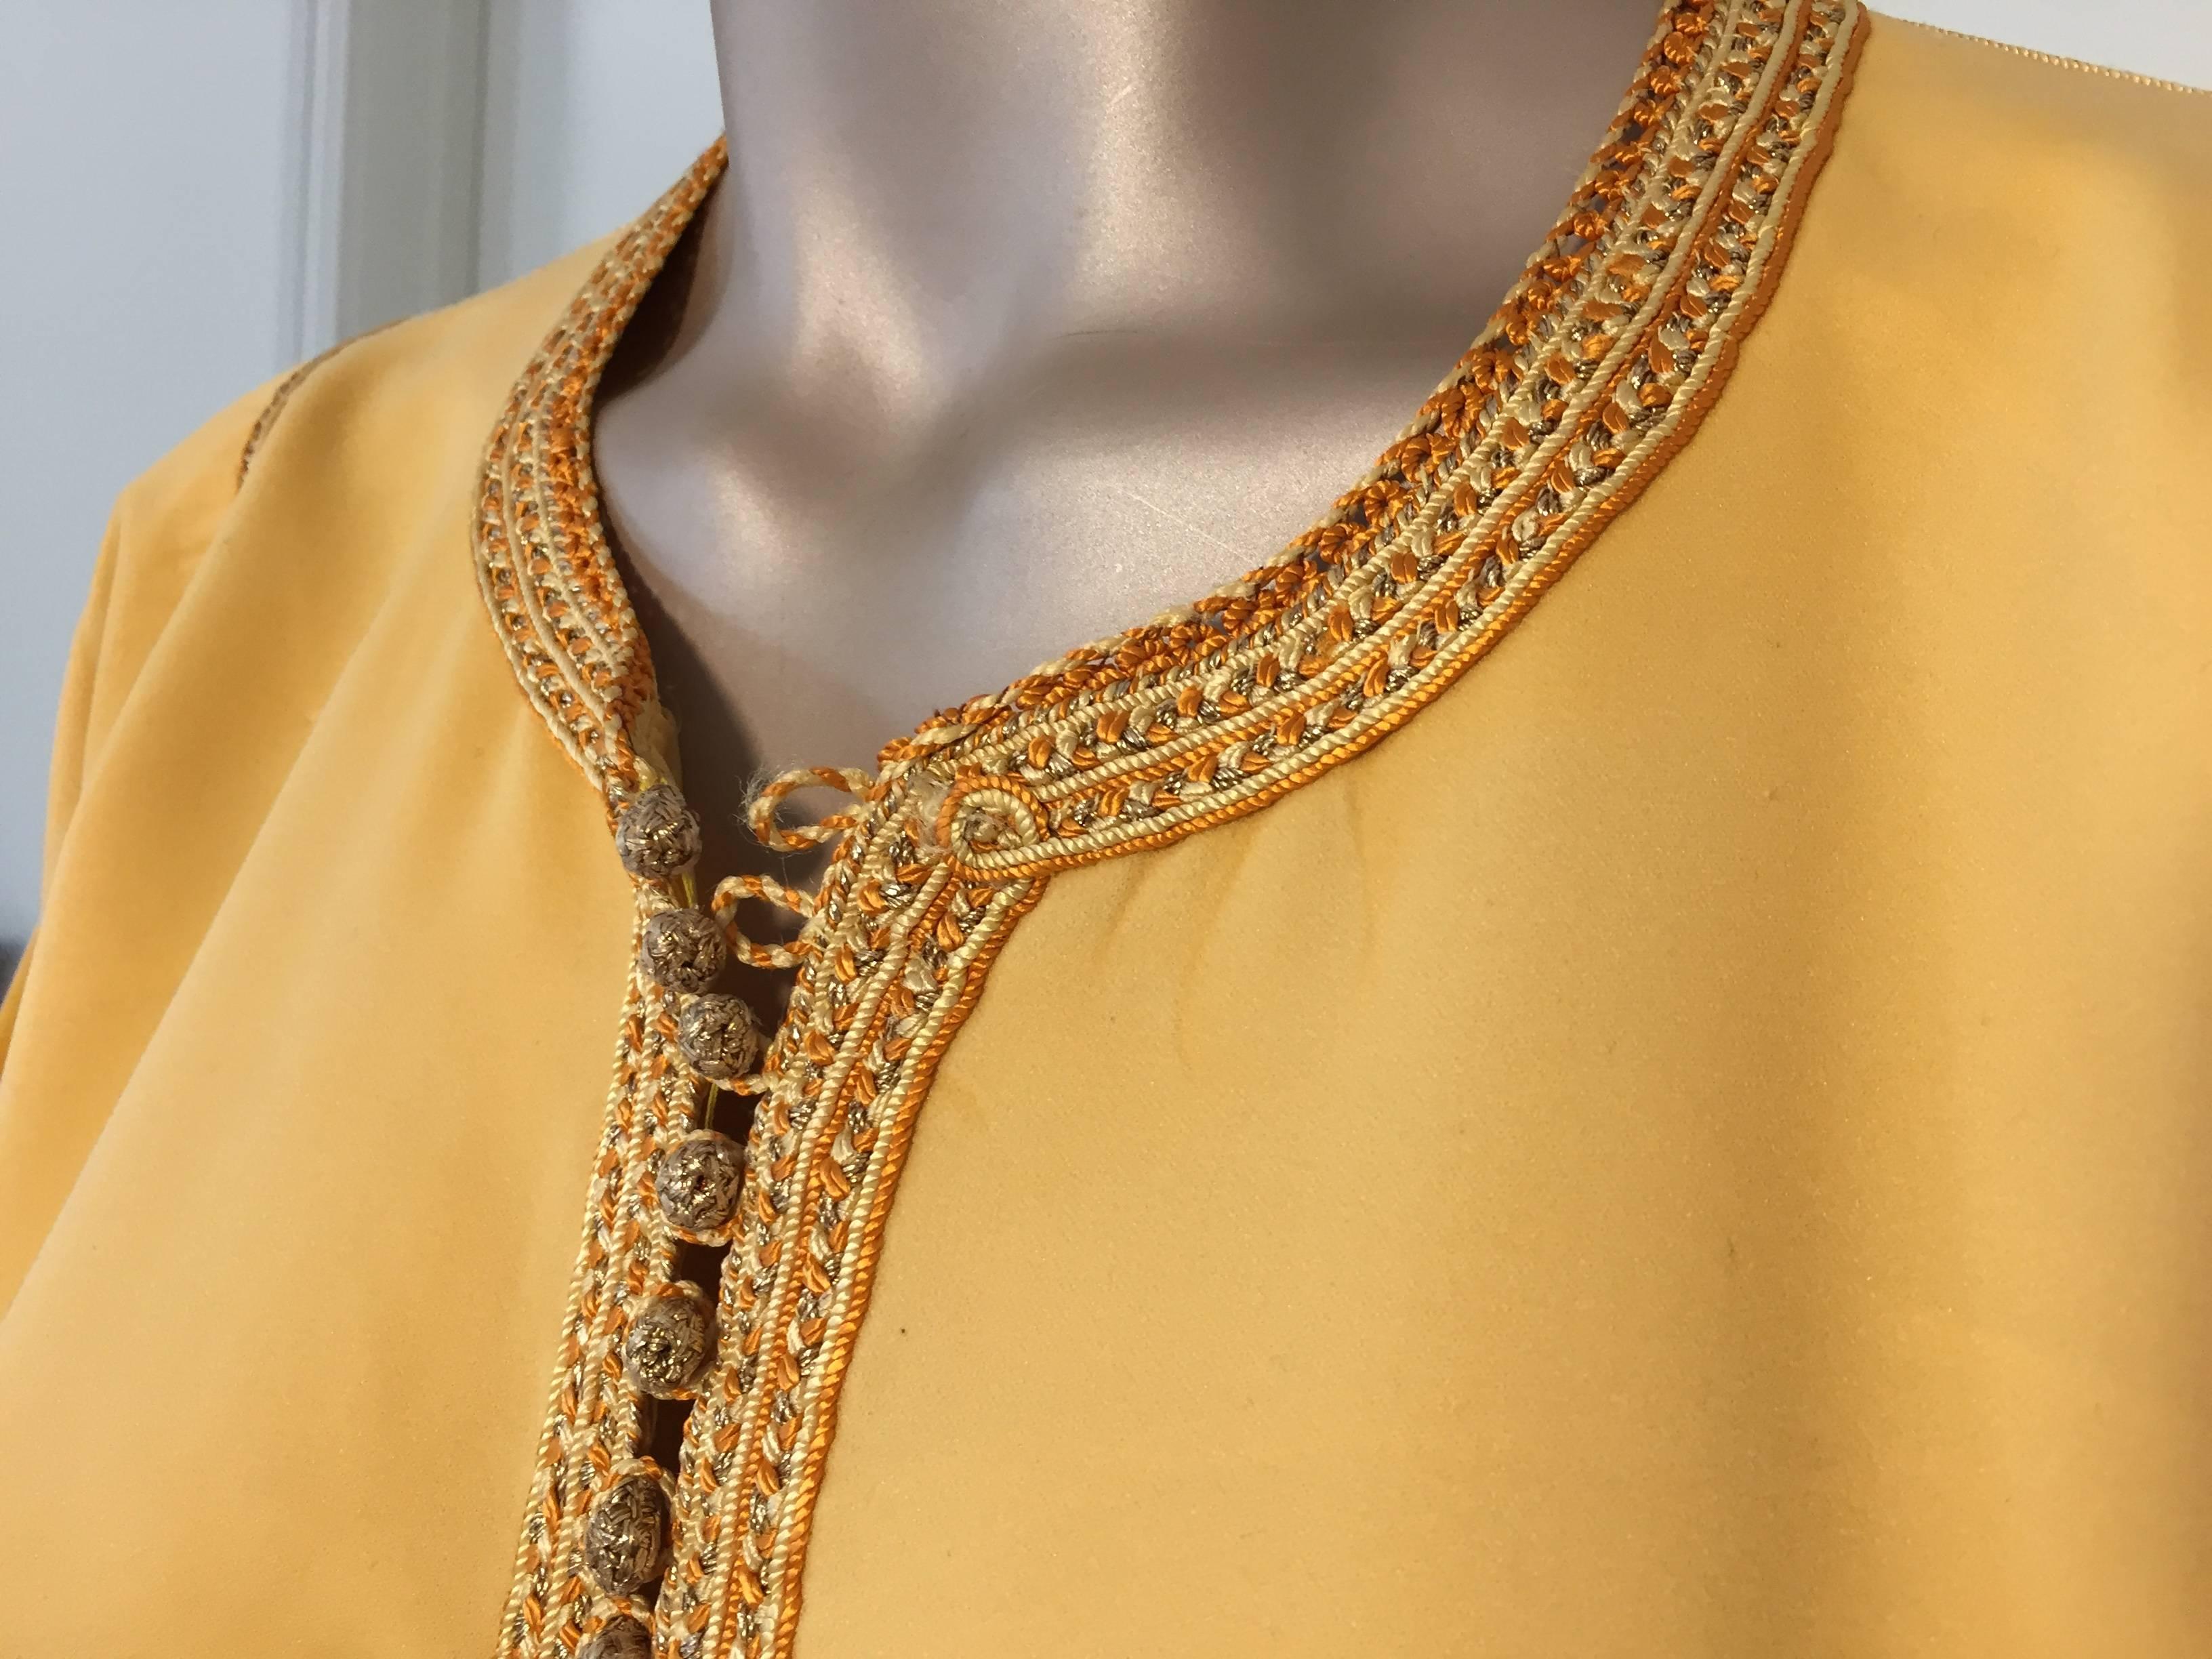 Elegant Moroccan caftan yellow gold color embroidered with gold trim,
circa 1960s.
This long Moorish maxi dress kaftan is embroidered and embellished with traditional designs in gold.
One of a kind custom evening Moroccan Middle Eastern gown.
The